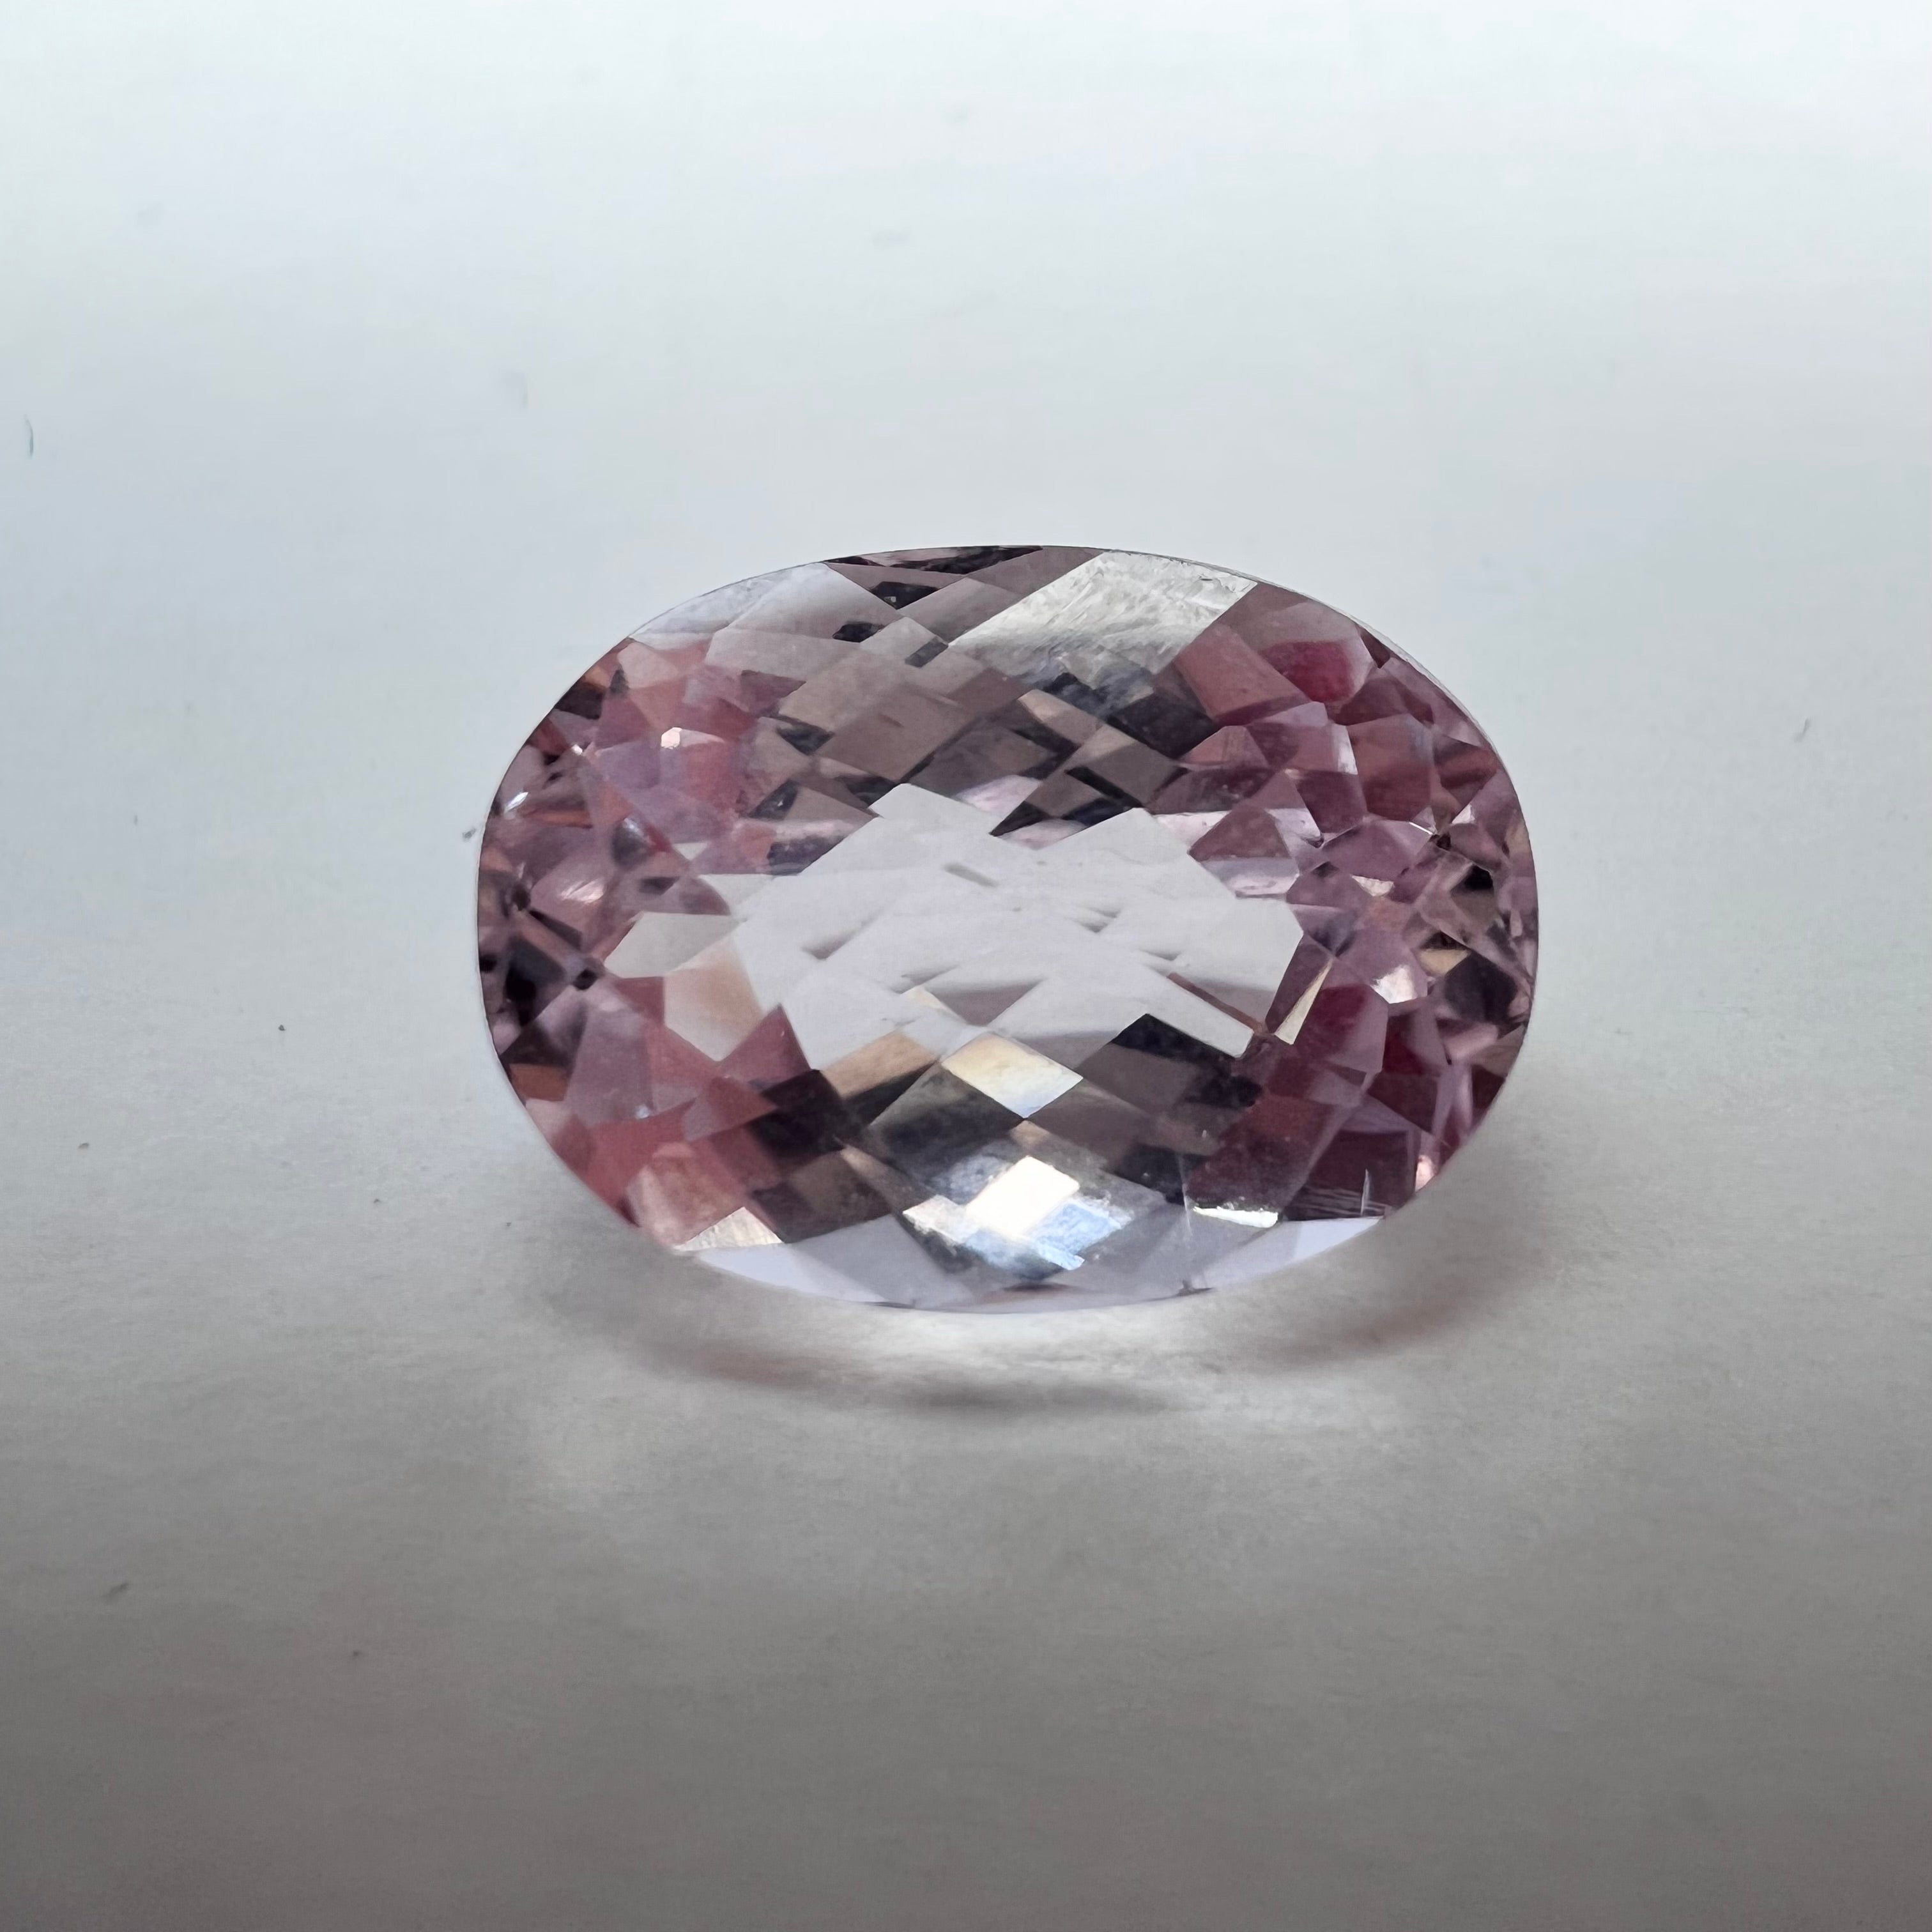 8.42CTW Natural Faceted Oval Kunzite 14.20x10.10mm Earth mined Gemstone